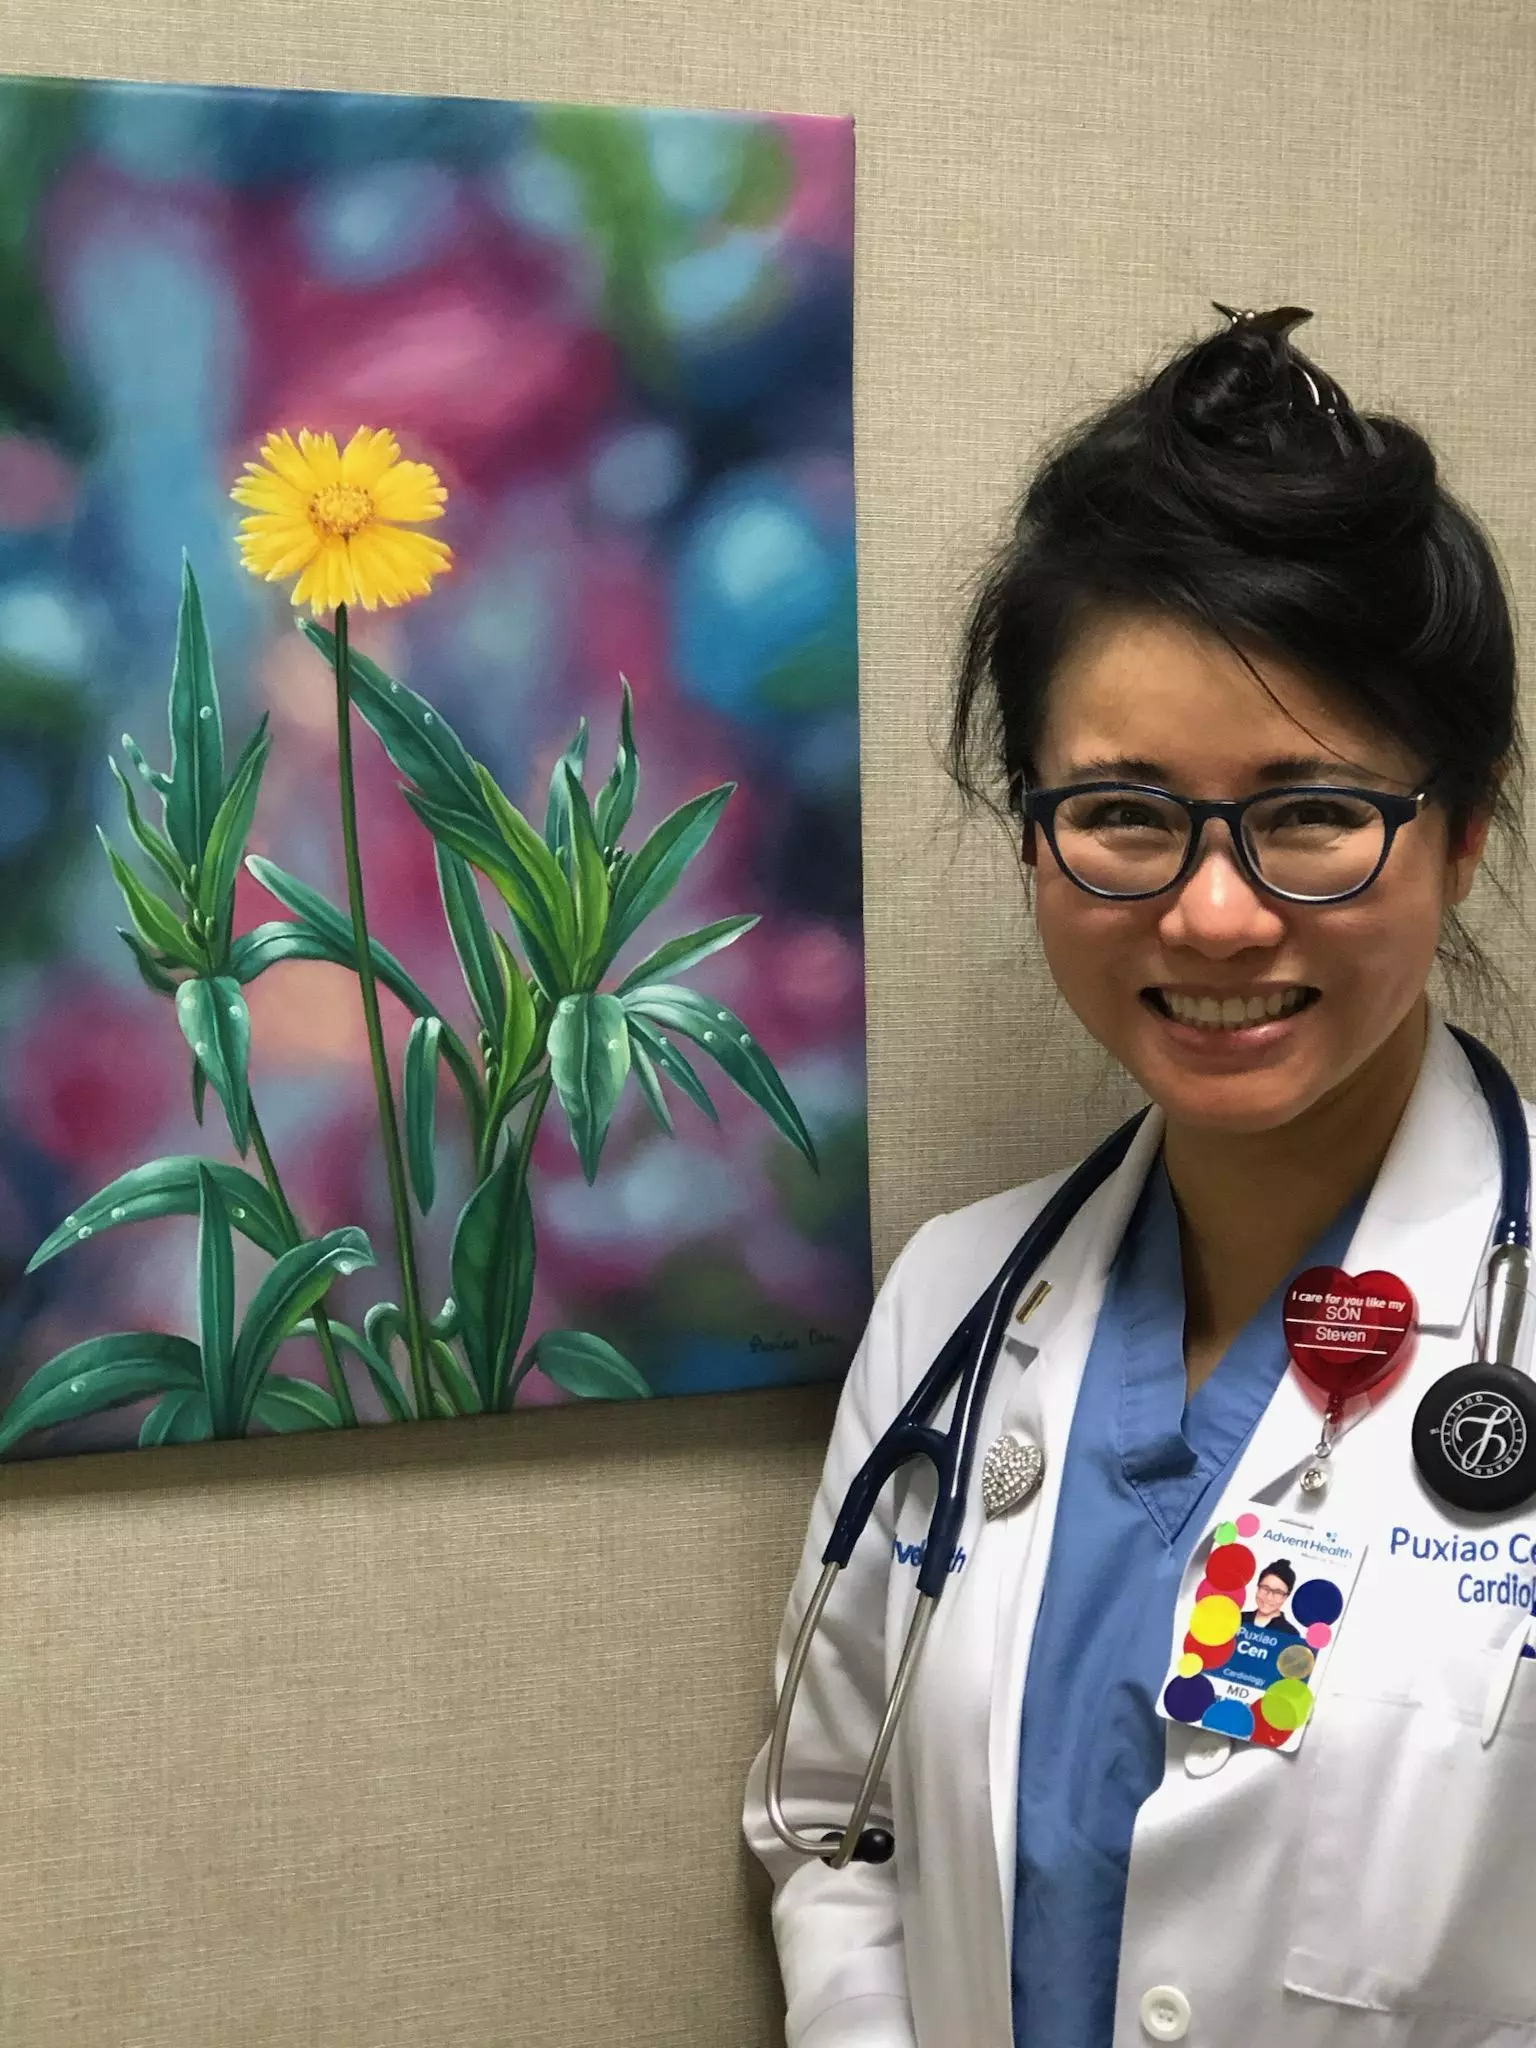 The cardiologist draws on her artistic talent to help her patients understand what’s going on in their bodies.